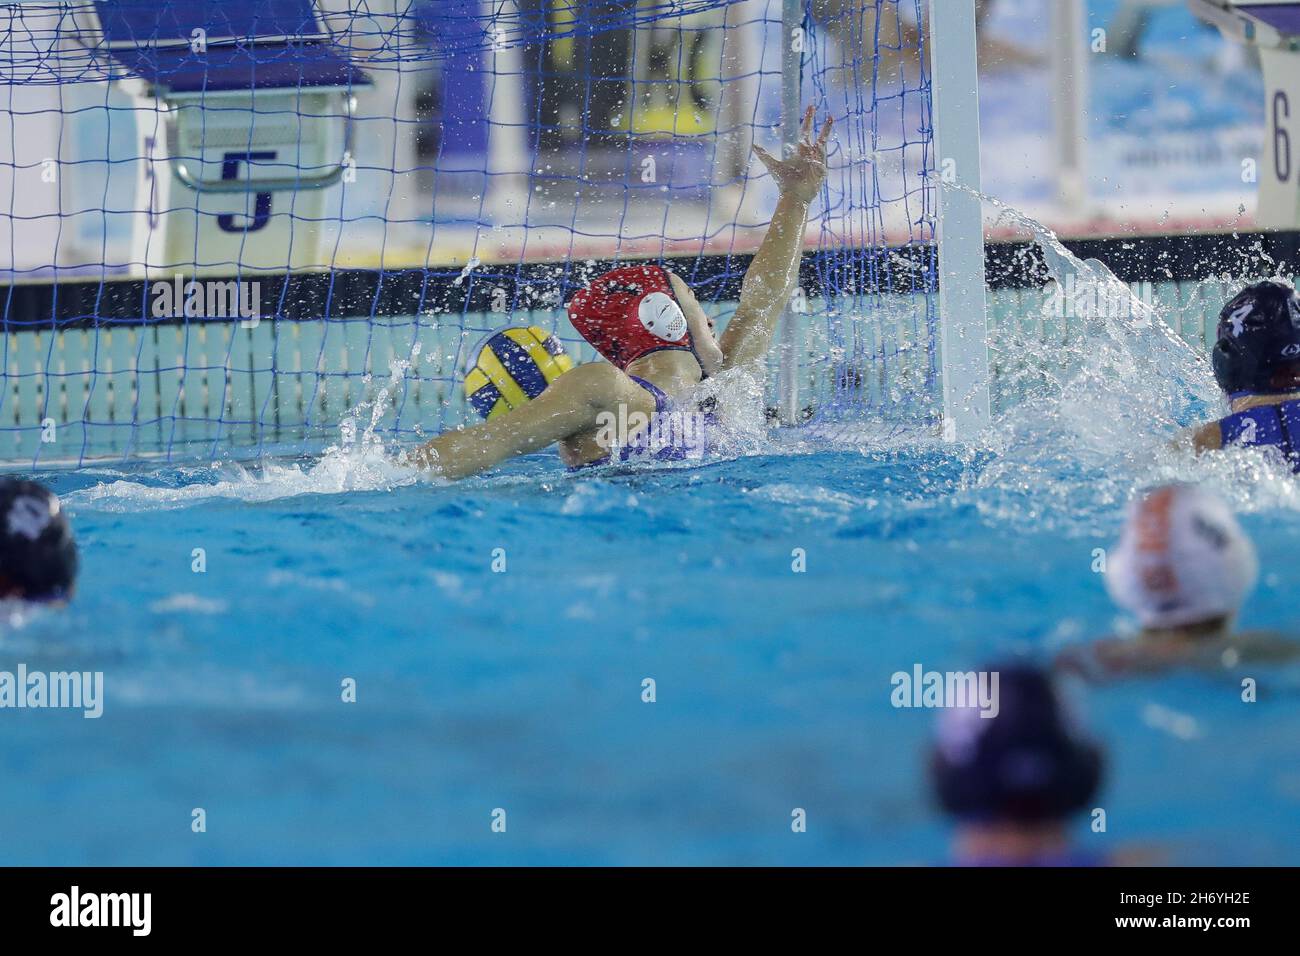 Rome, Italy. 18th Nov, 2021. goal SIS Roma during SIS Roma vs ZVL 1886 Center, Waterpolo EuroLeague Women match in Rome, Italy, November 18 2021 Credit: Independent Photo Agency/Alamy Live News Stock Photo